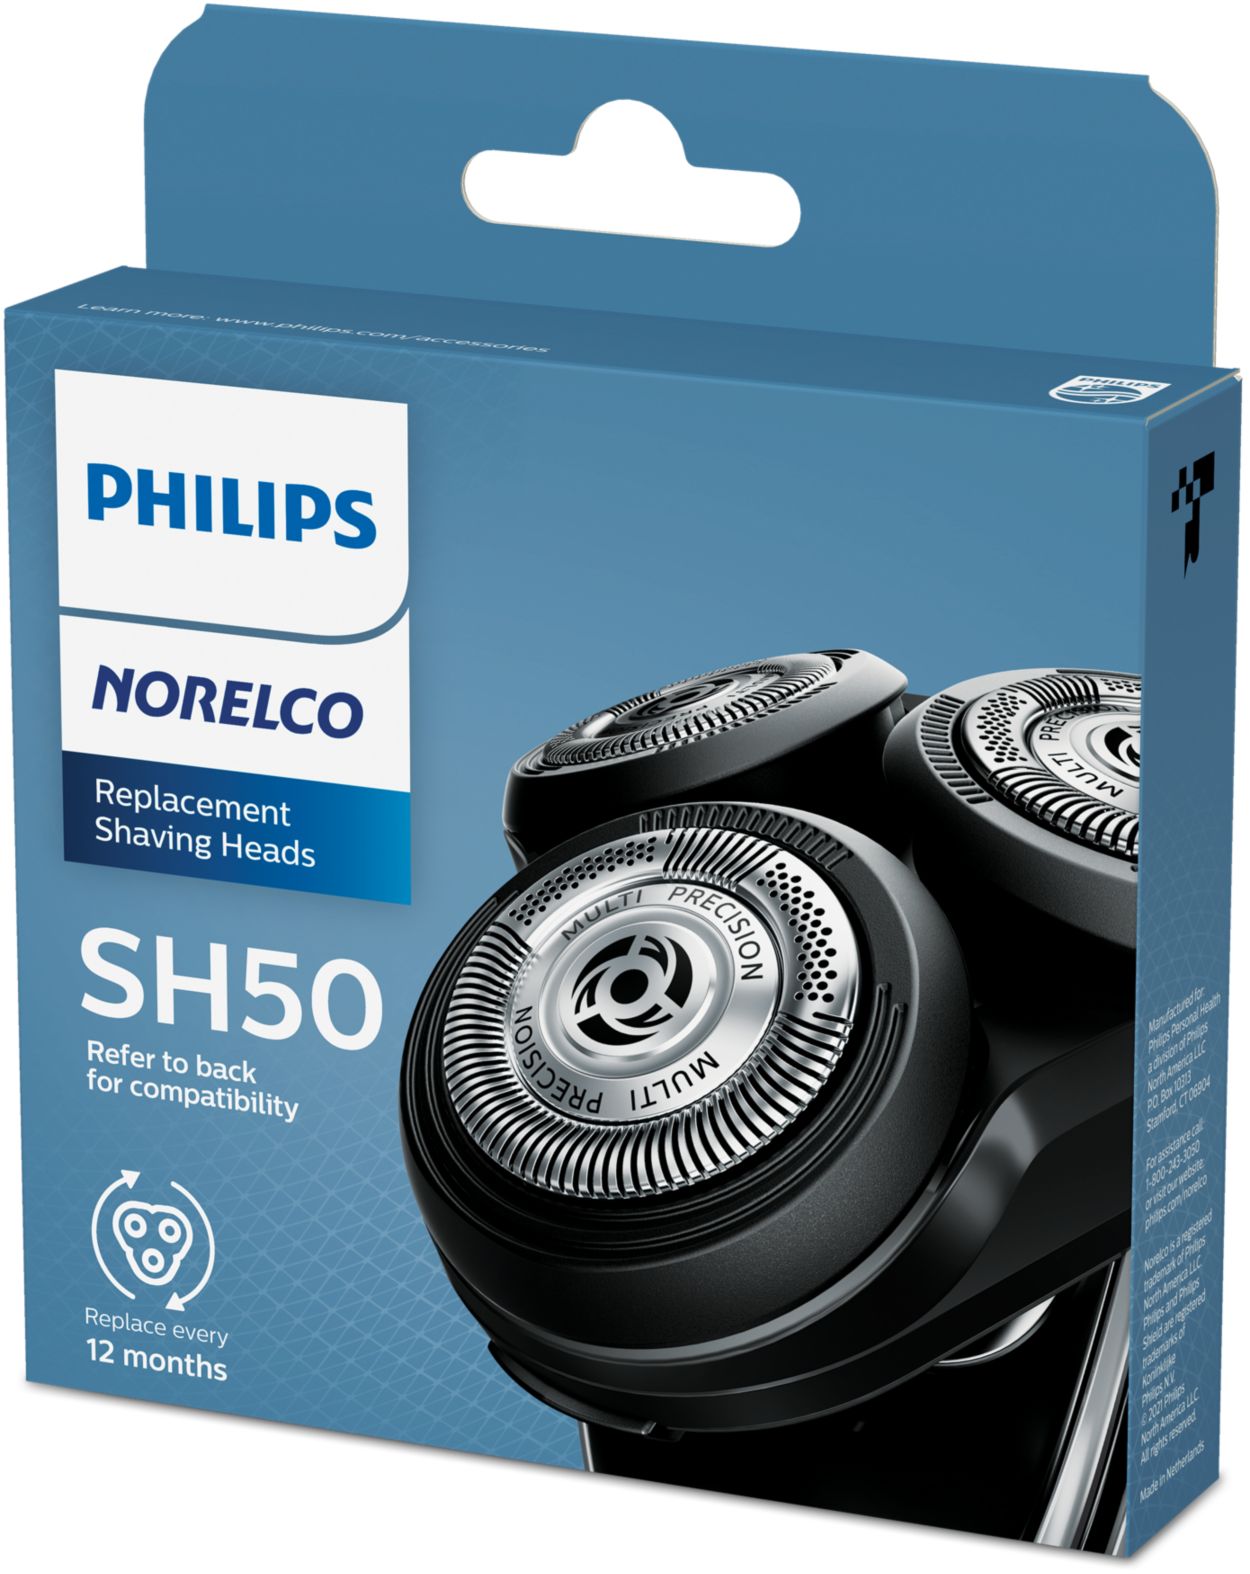 Philips Norelco SH50 Heads Shaving Replacement Series 5000